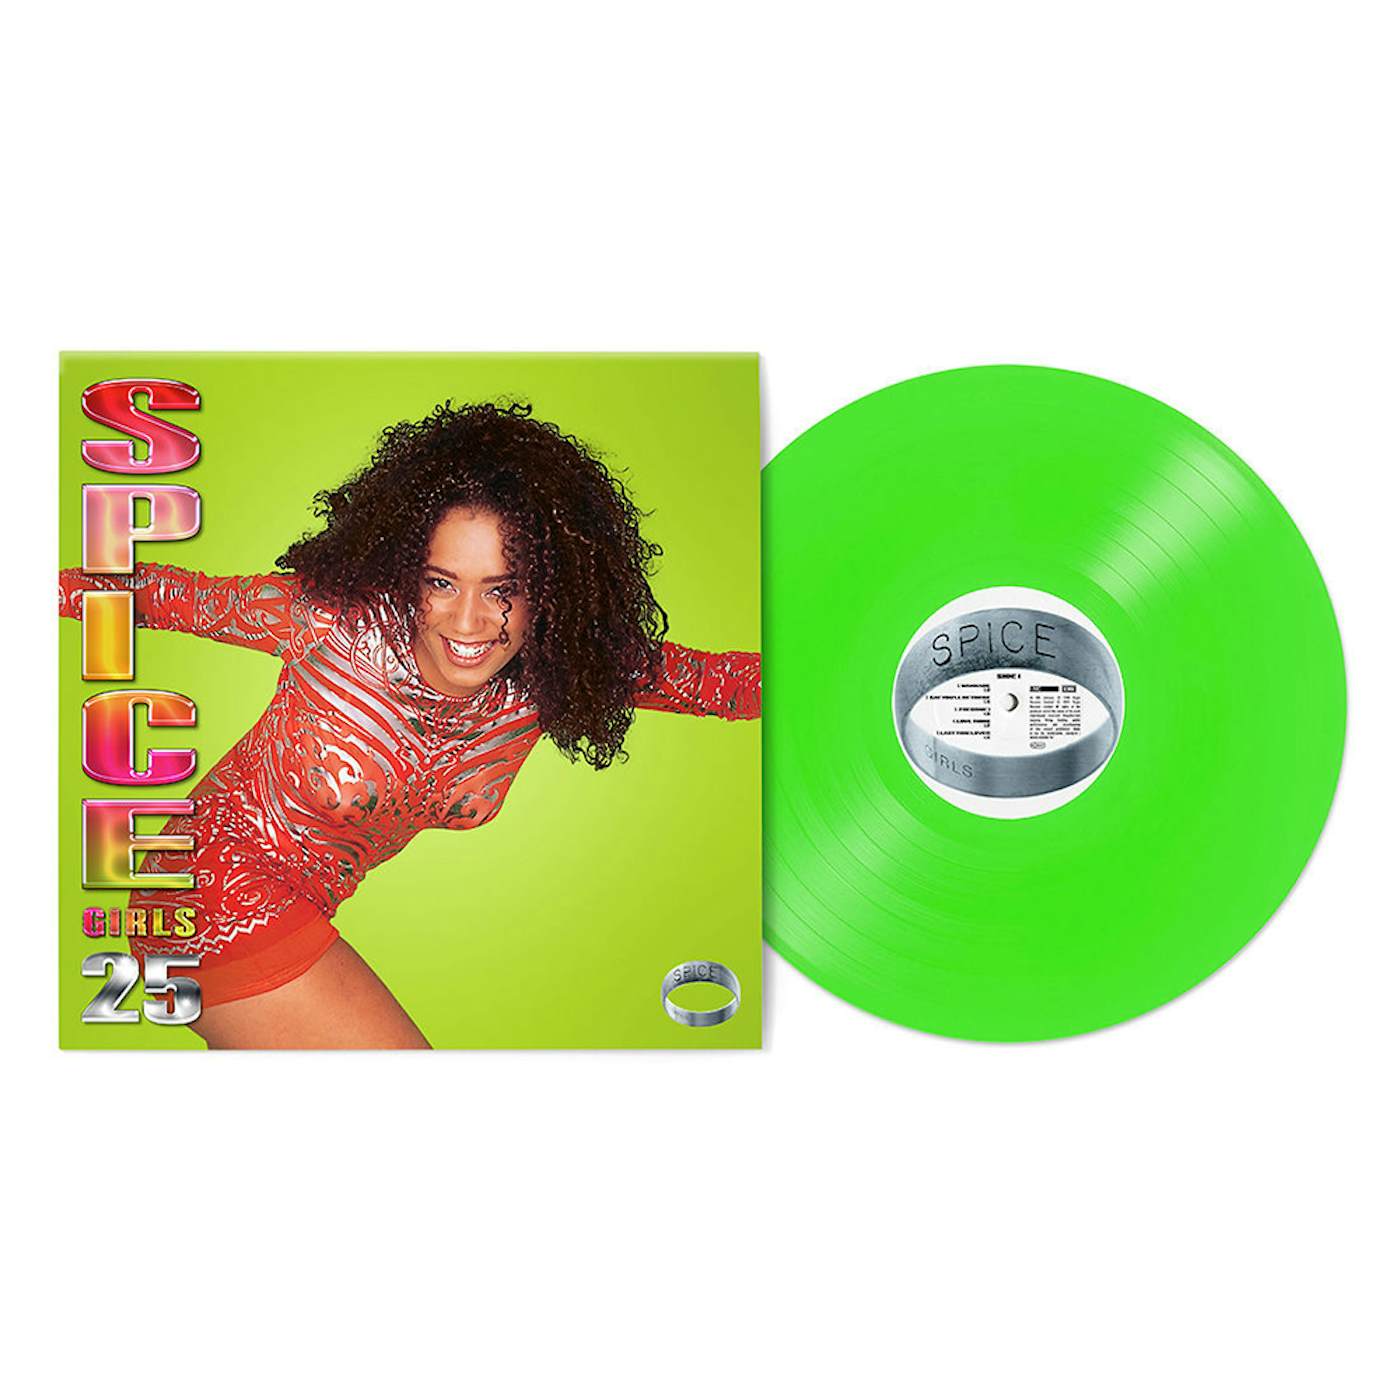 Spice Girls SPICE - 25TH ANNIVERSARY (‘SCARY’ LIGHT GREEN COLORED LP) (Vinyl)